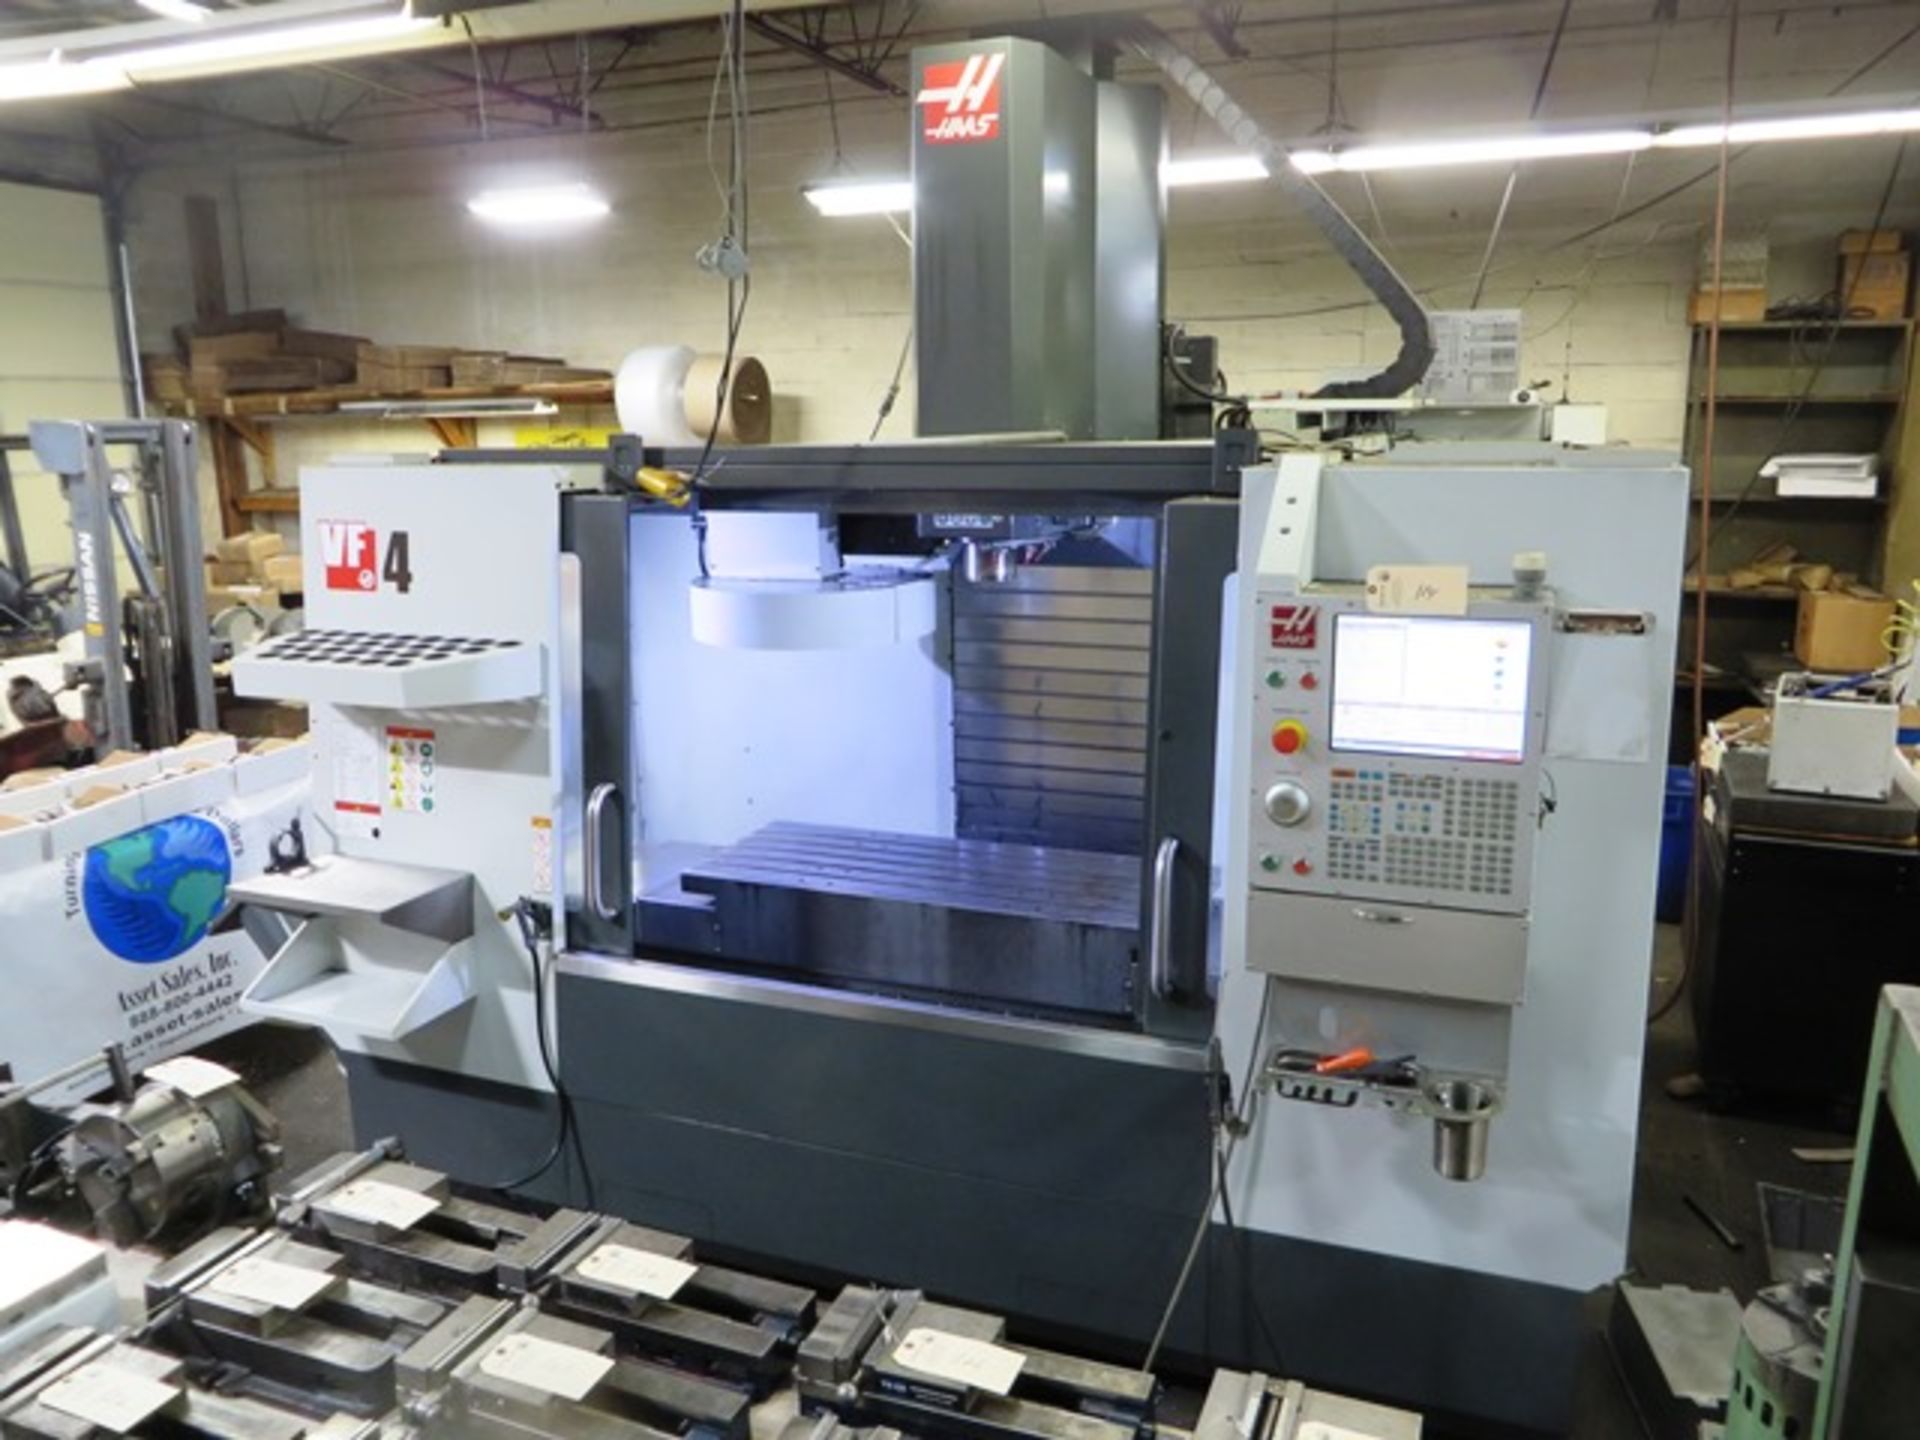 Haas VF-4 3-Axis CNC Vertical Machining Center - Image 4 of 6